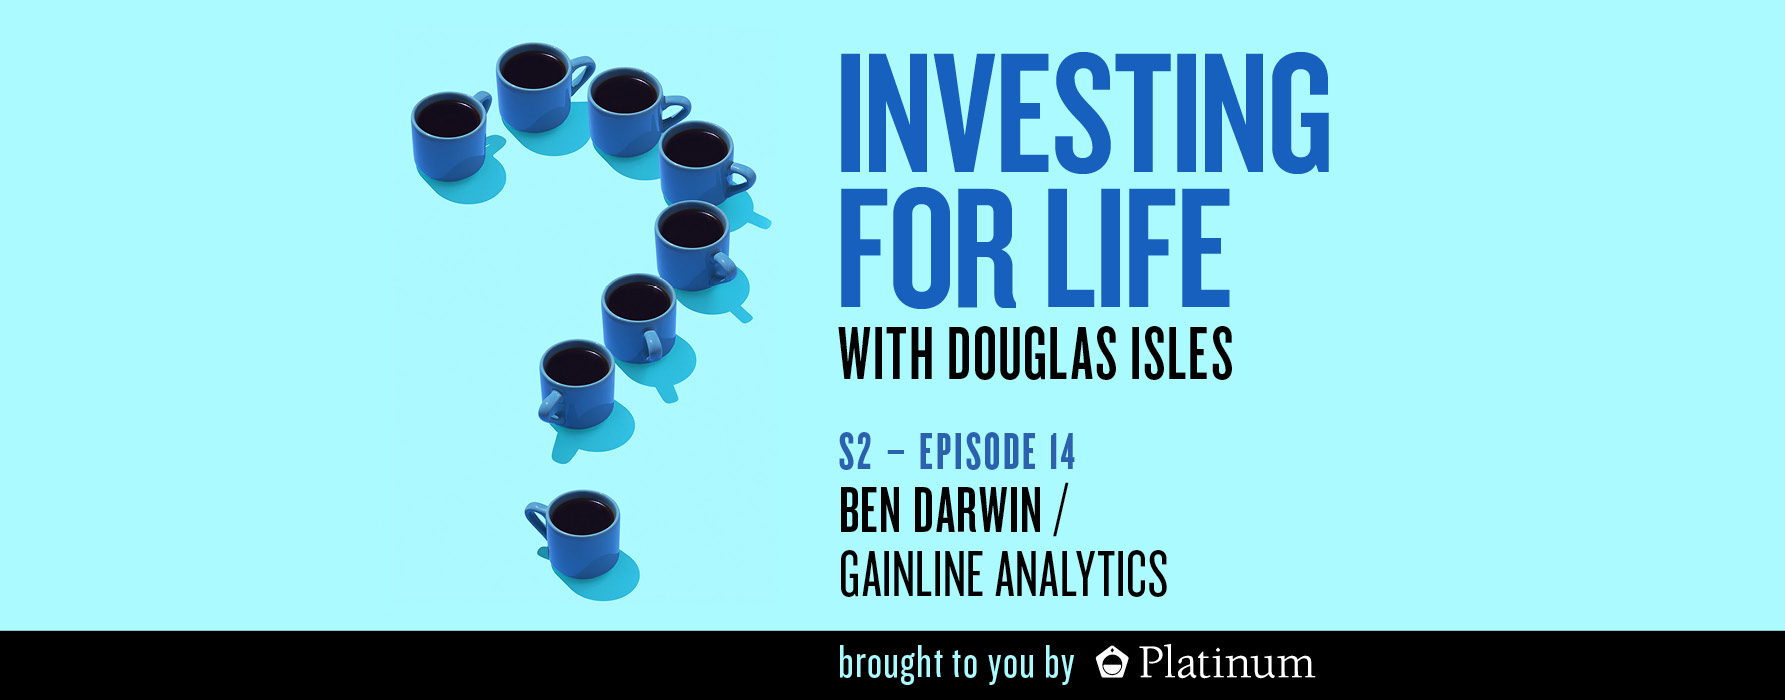 Investing for Life Podcast – Ben Darwin, Co-Founder, GAIN LINE Analytics